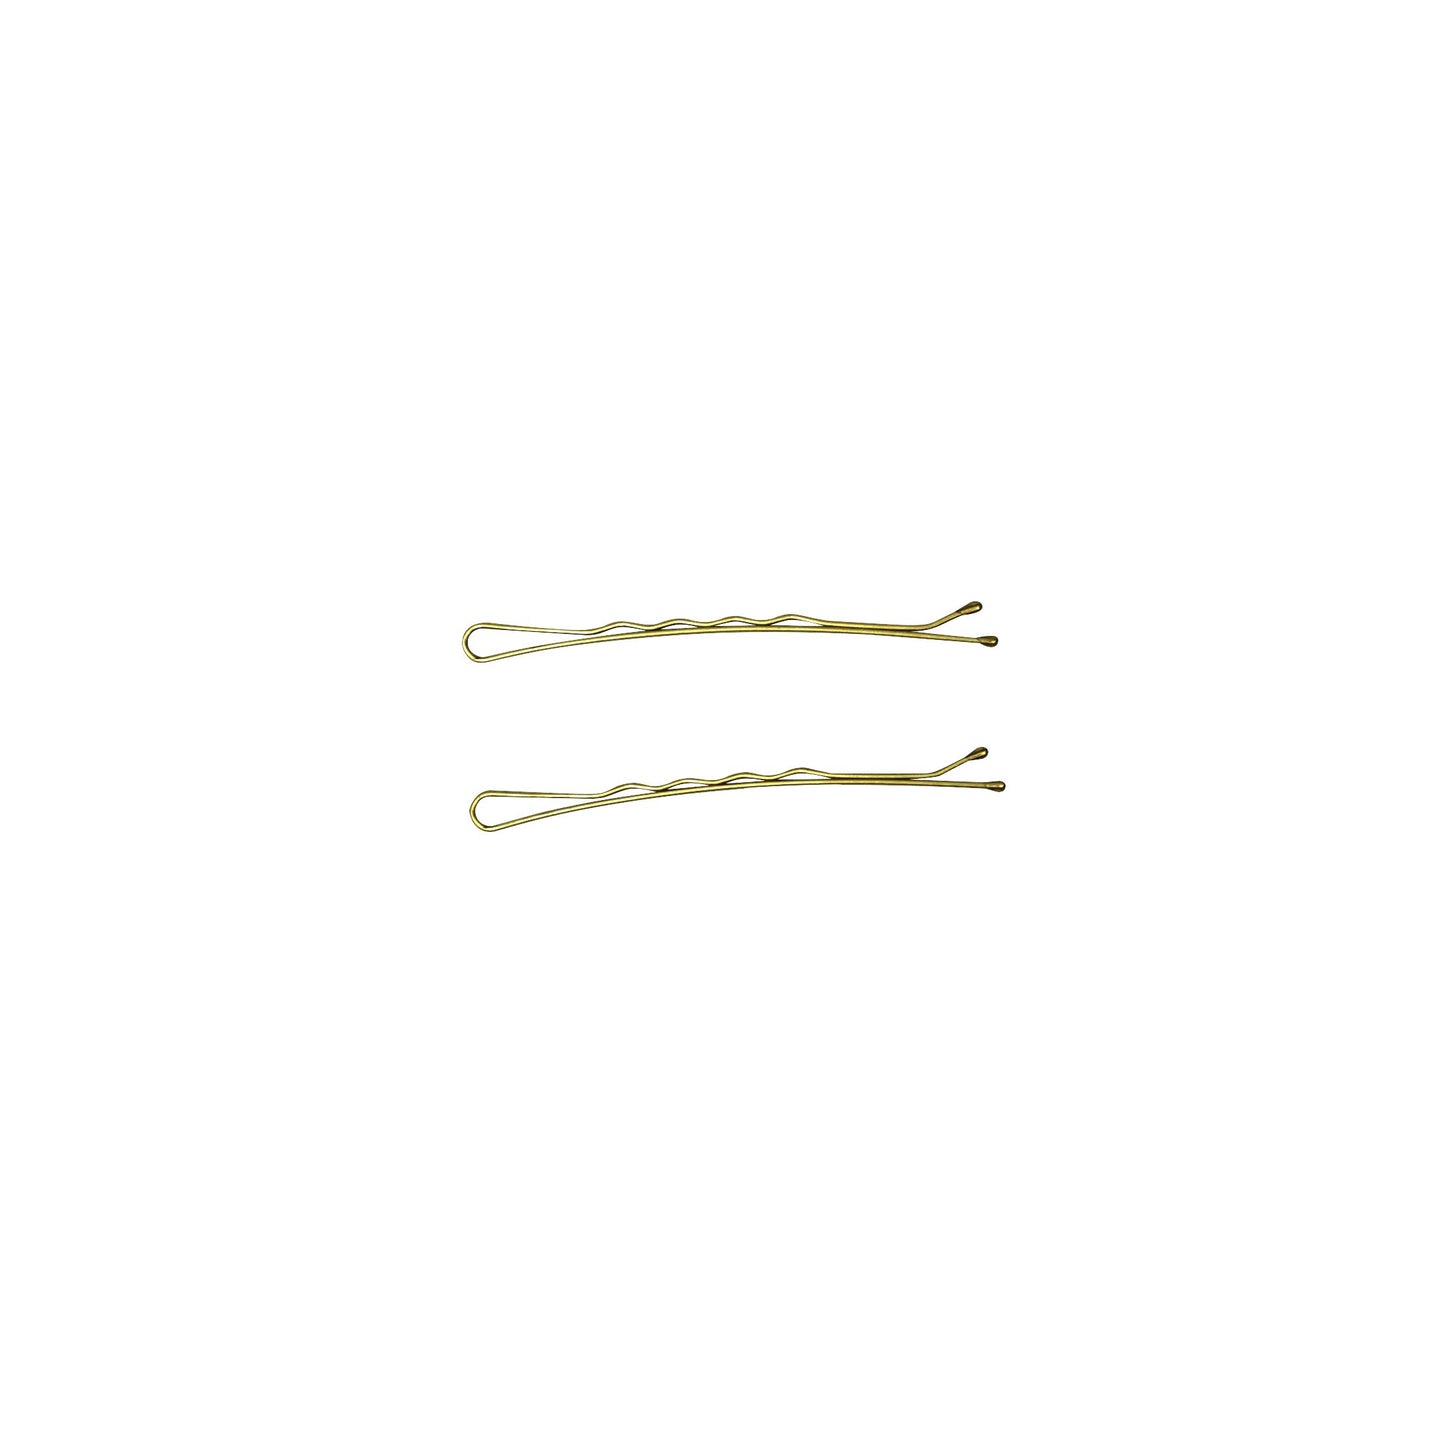 280, Brassed Color, 2.4in (6.0cm), Italian Made Flat Bobby Pins, Recloseable Stay Clean and Organized Container